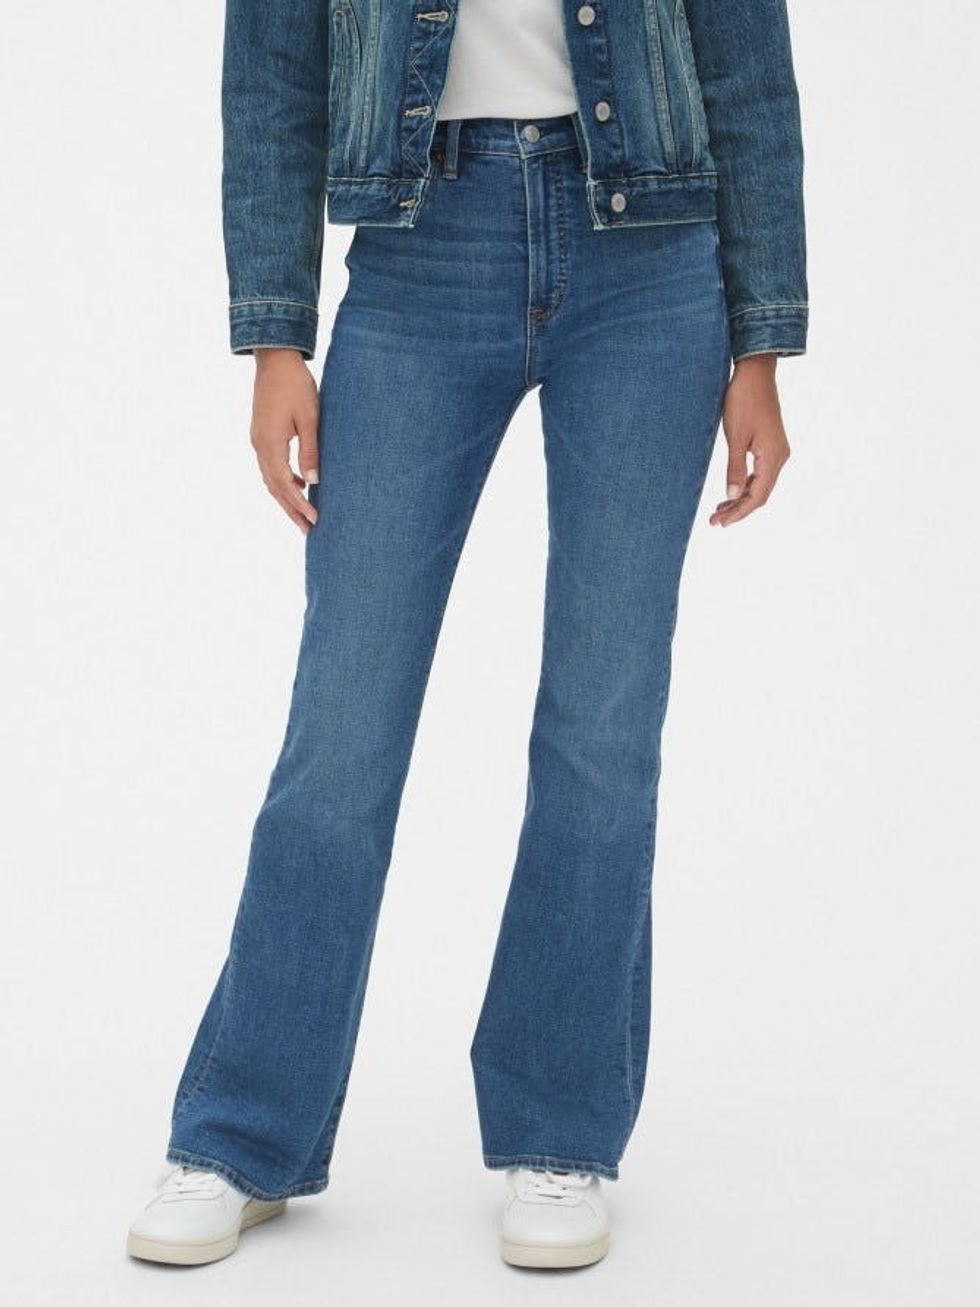 How Your Fave Brands Are Tackling Fall's Denim Trends - Brit + Co